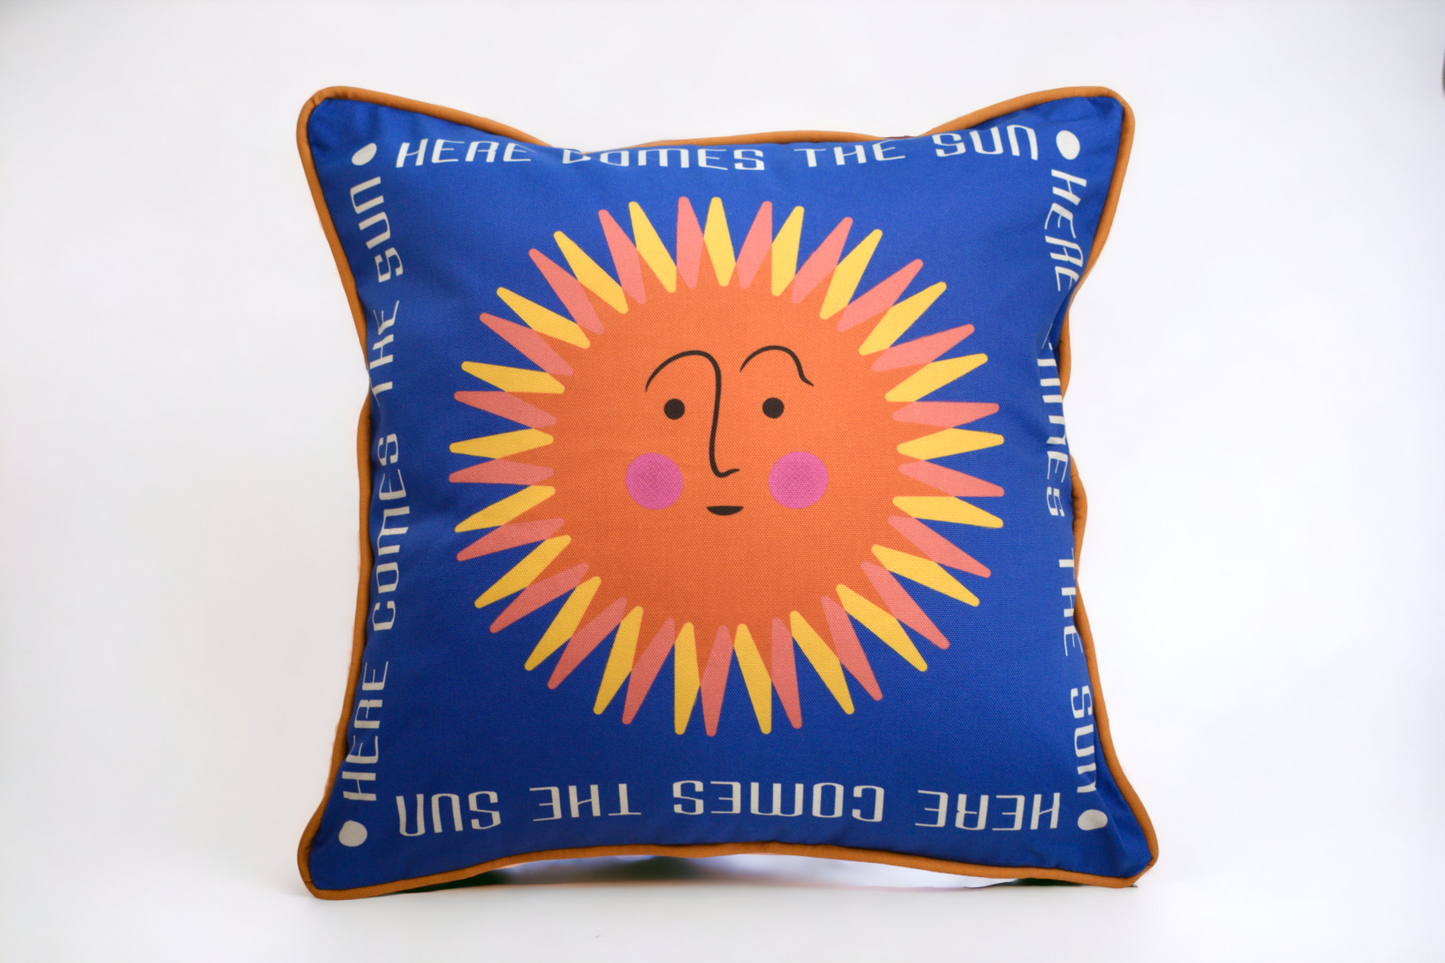 Retro sun cushion with a blue background and golden piping around the edge. On the back there is a retro geometric pattern